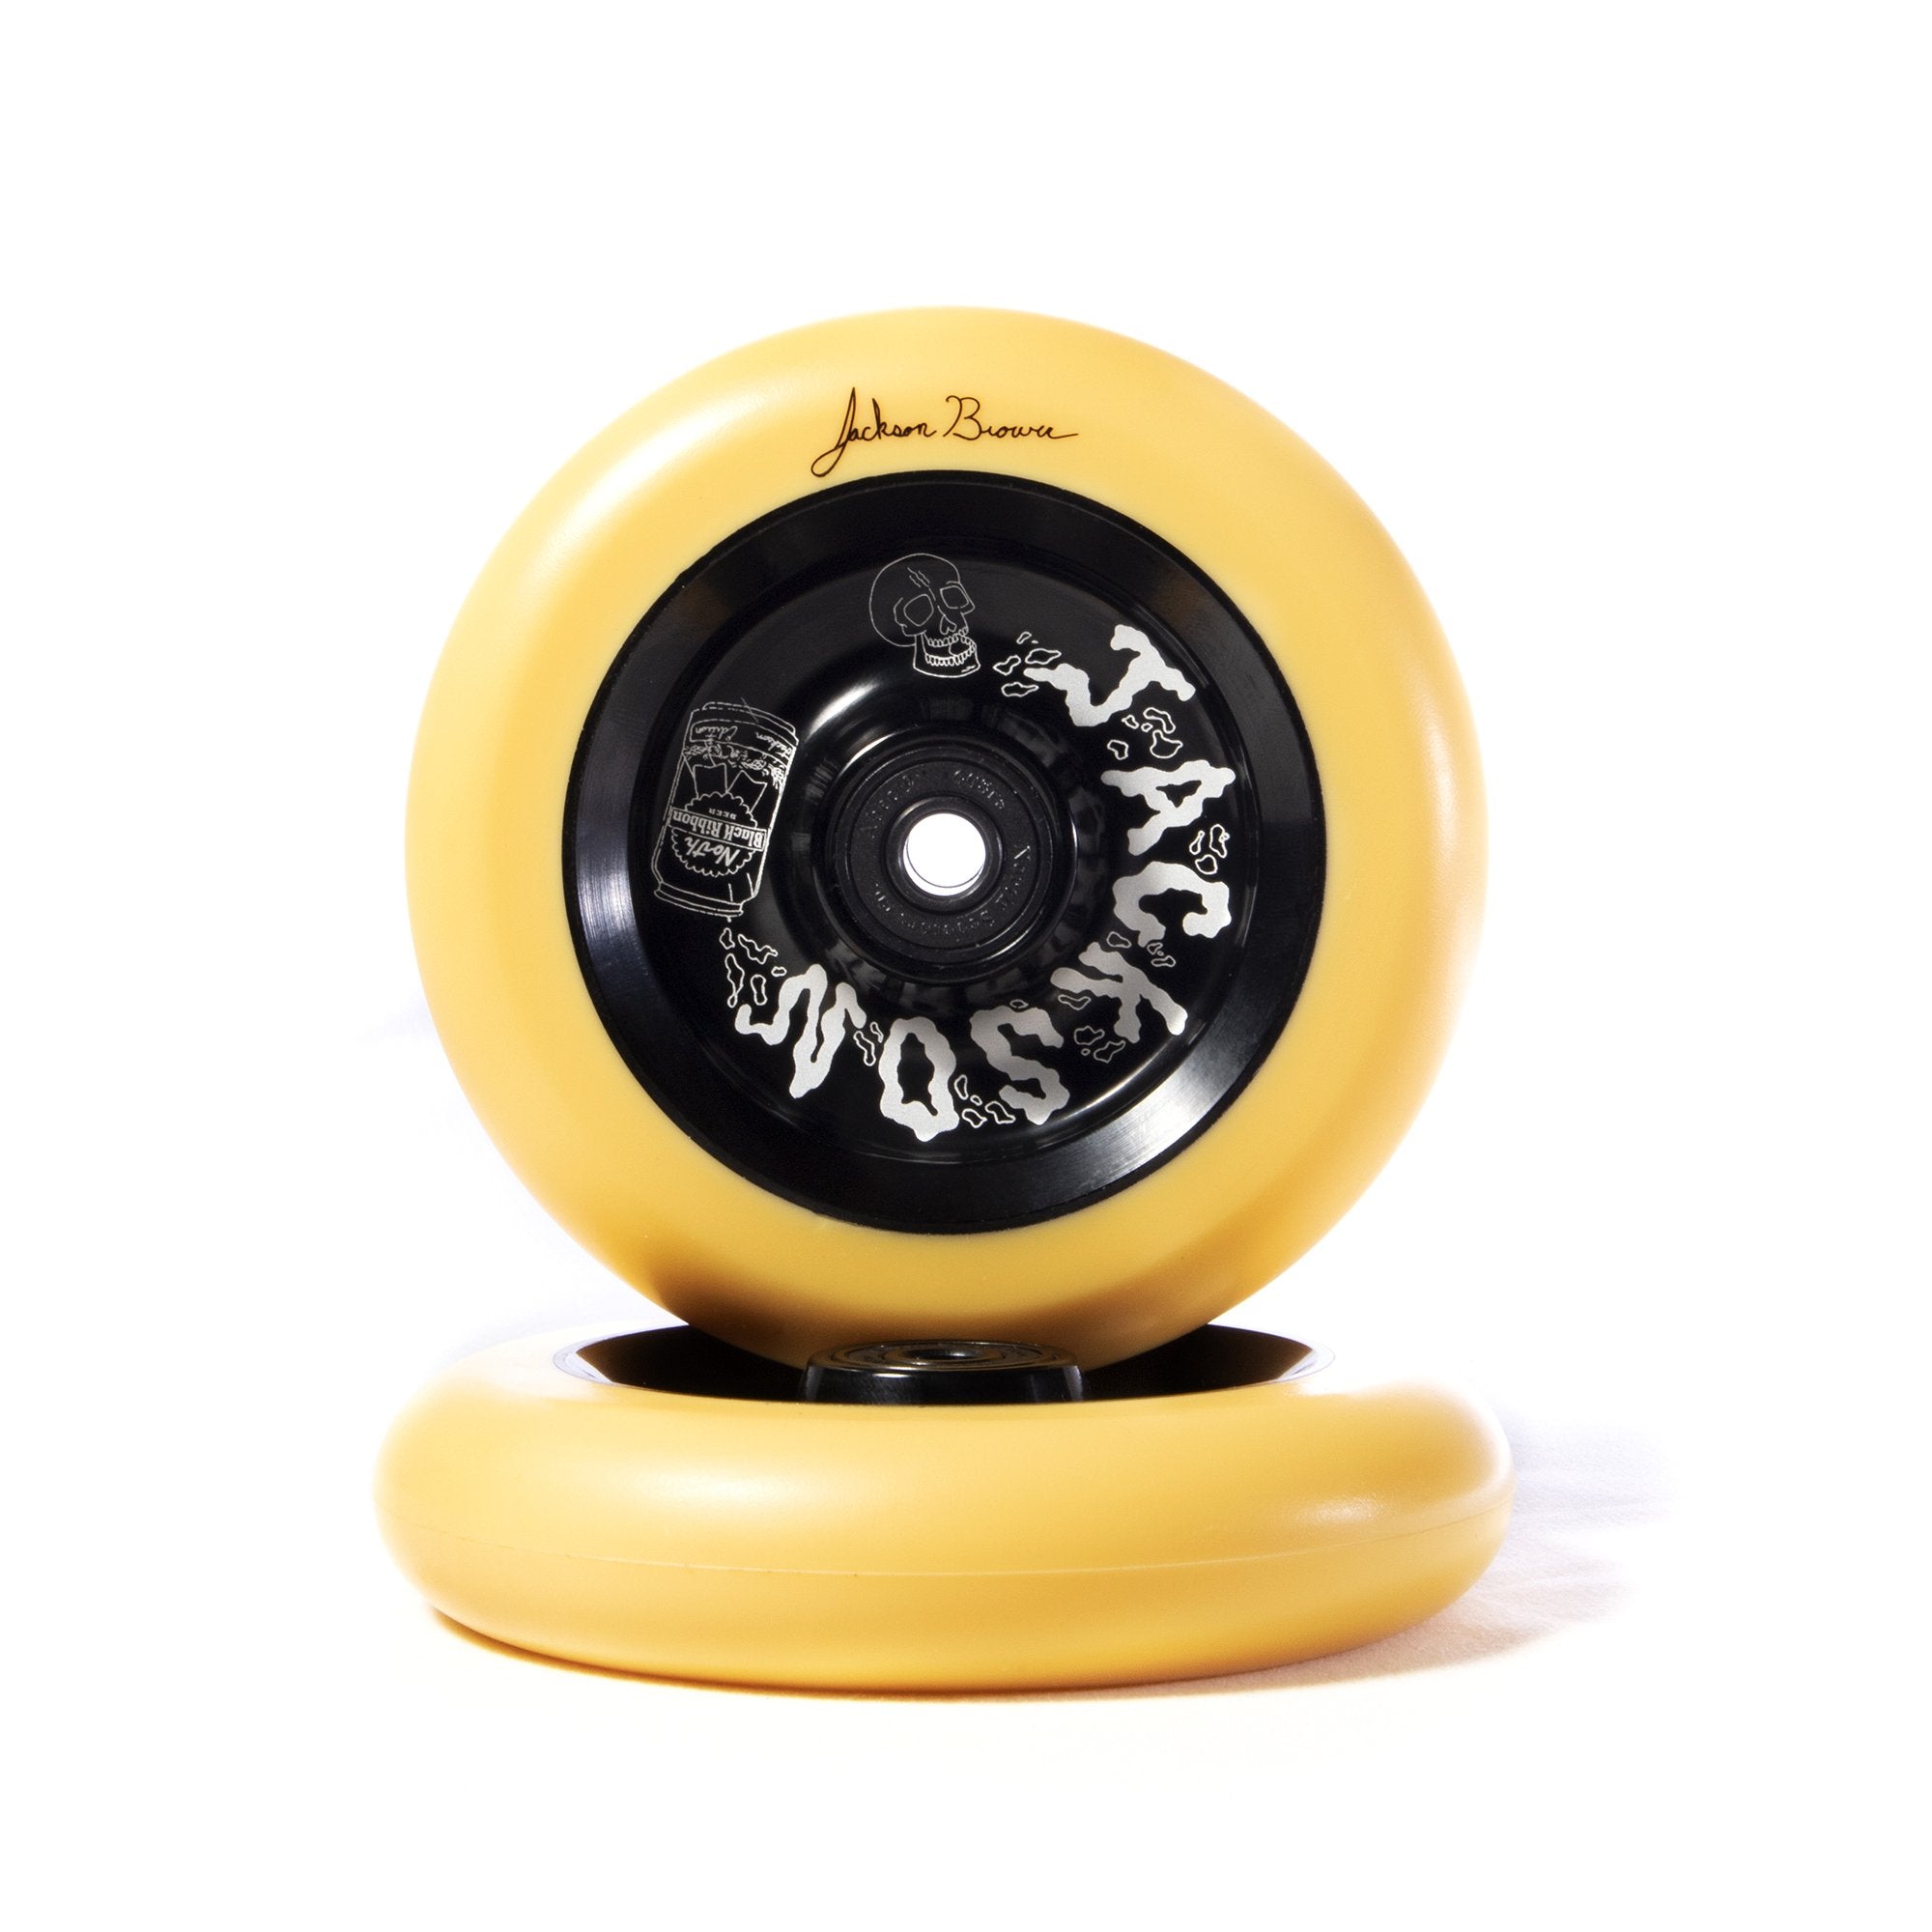 North Scooters Jackson Brower Signature 115X30mm (PAIR) - Scooter Wheels Set On Top